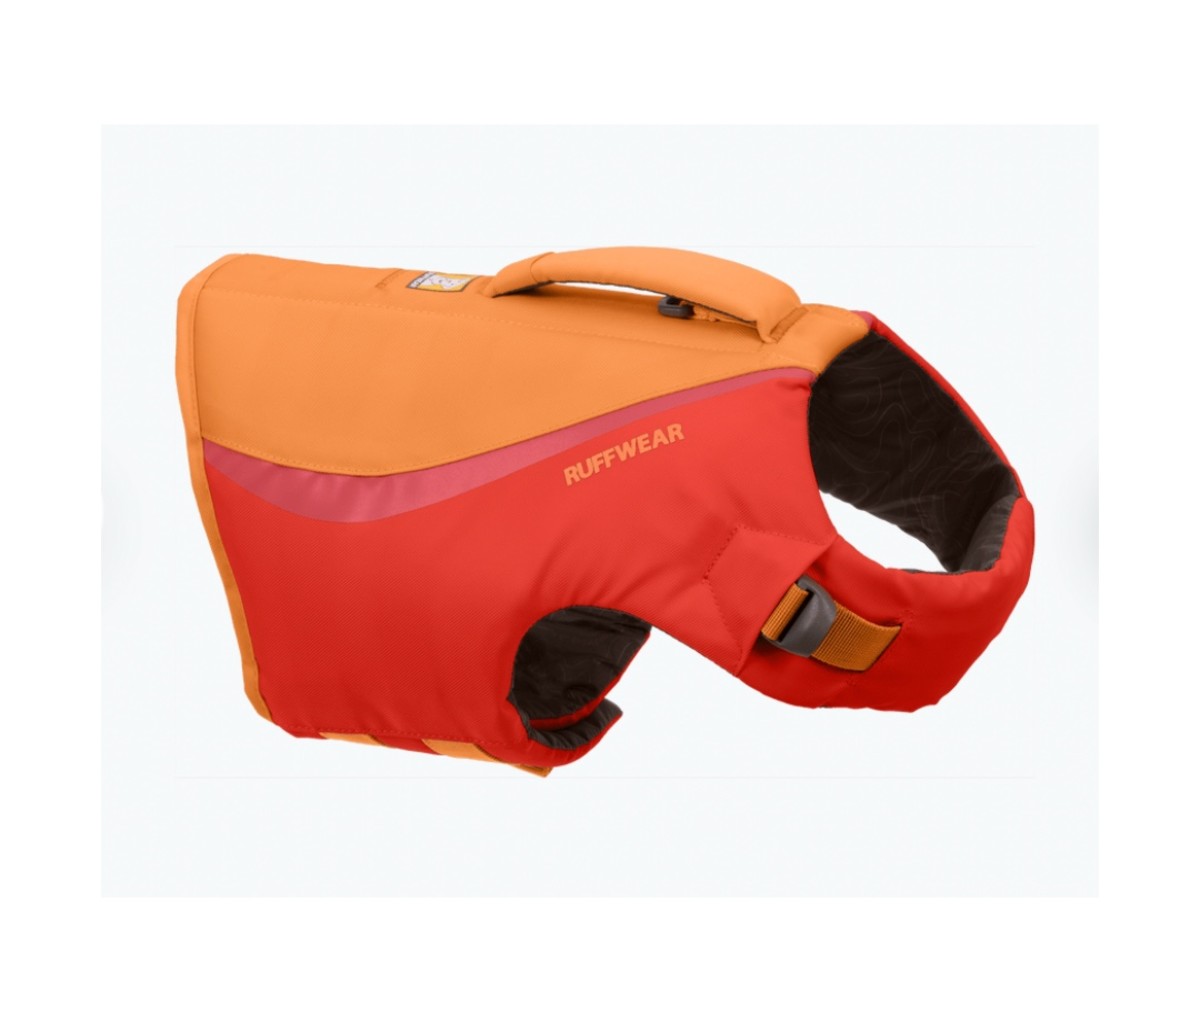 The Ruffwear Float Coat keeps your dog swimming high and having fun in the water.